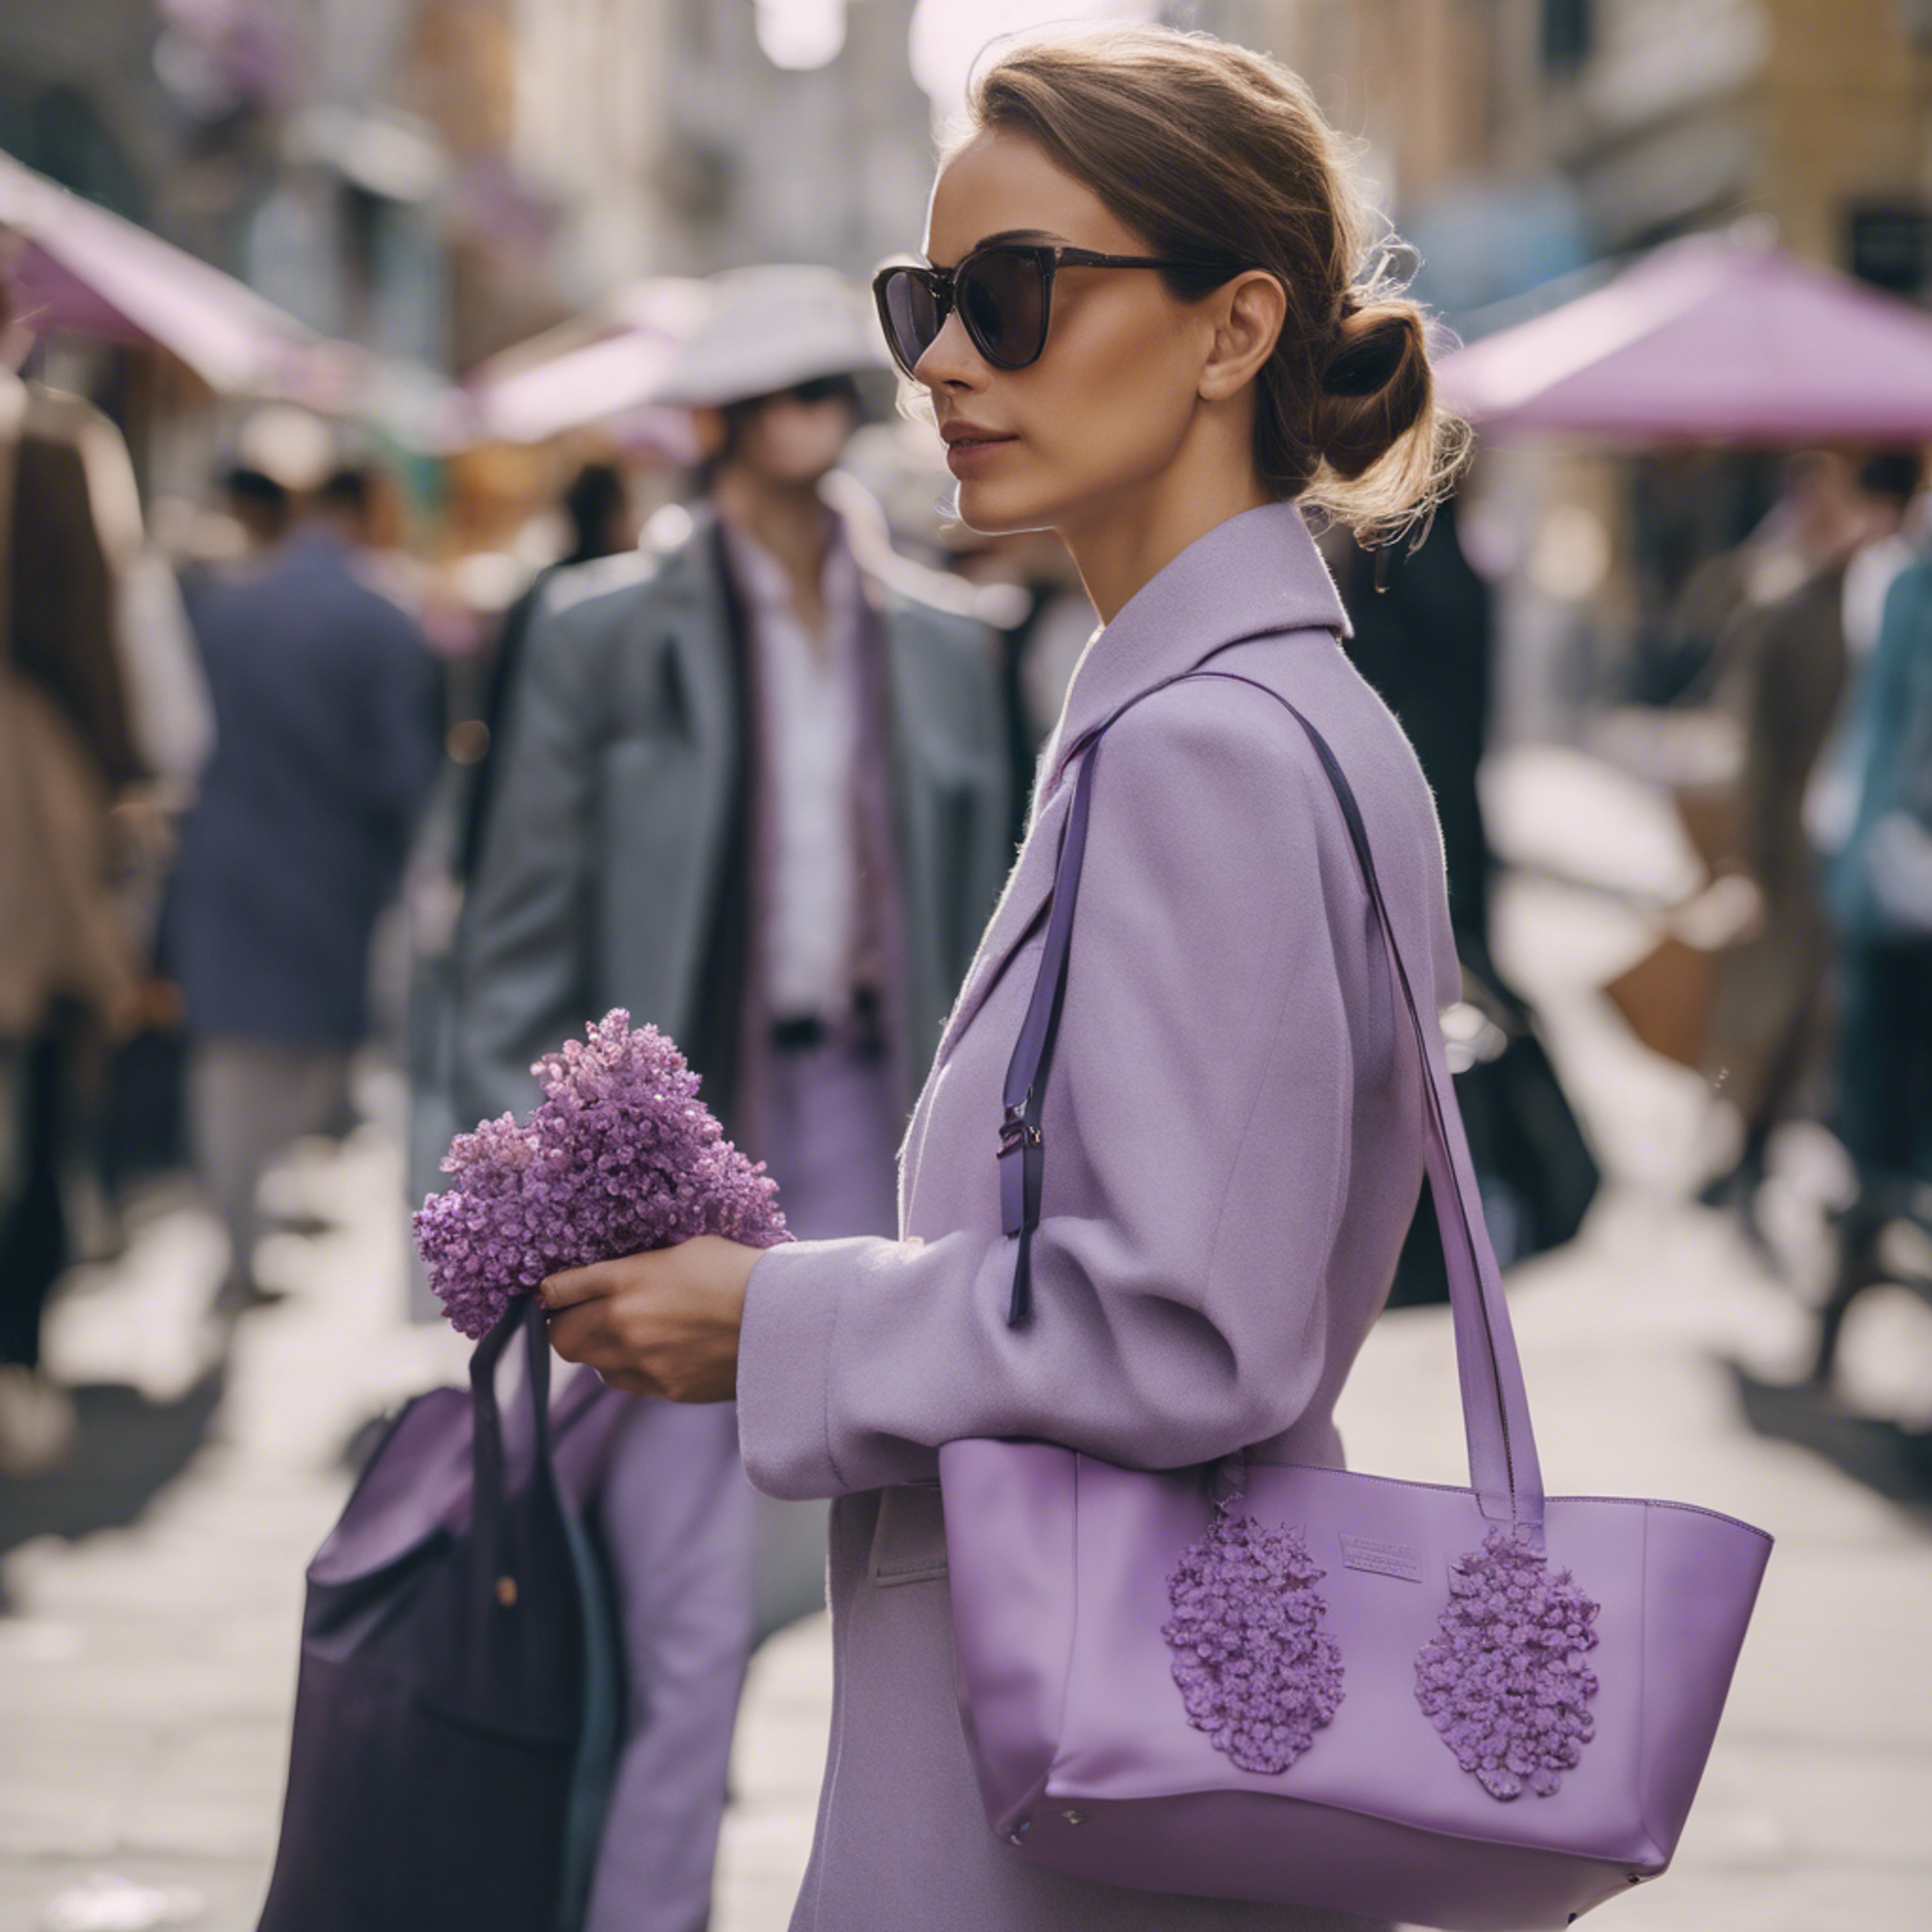 An elegant lady carrying a preppy lilac tote bag while walking along a crowded city street.壁紙[fda66da185c34bc685d3]